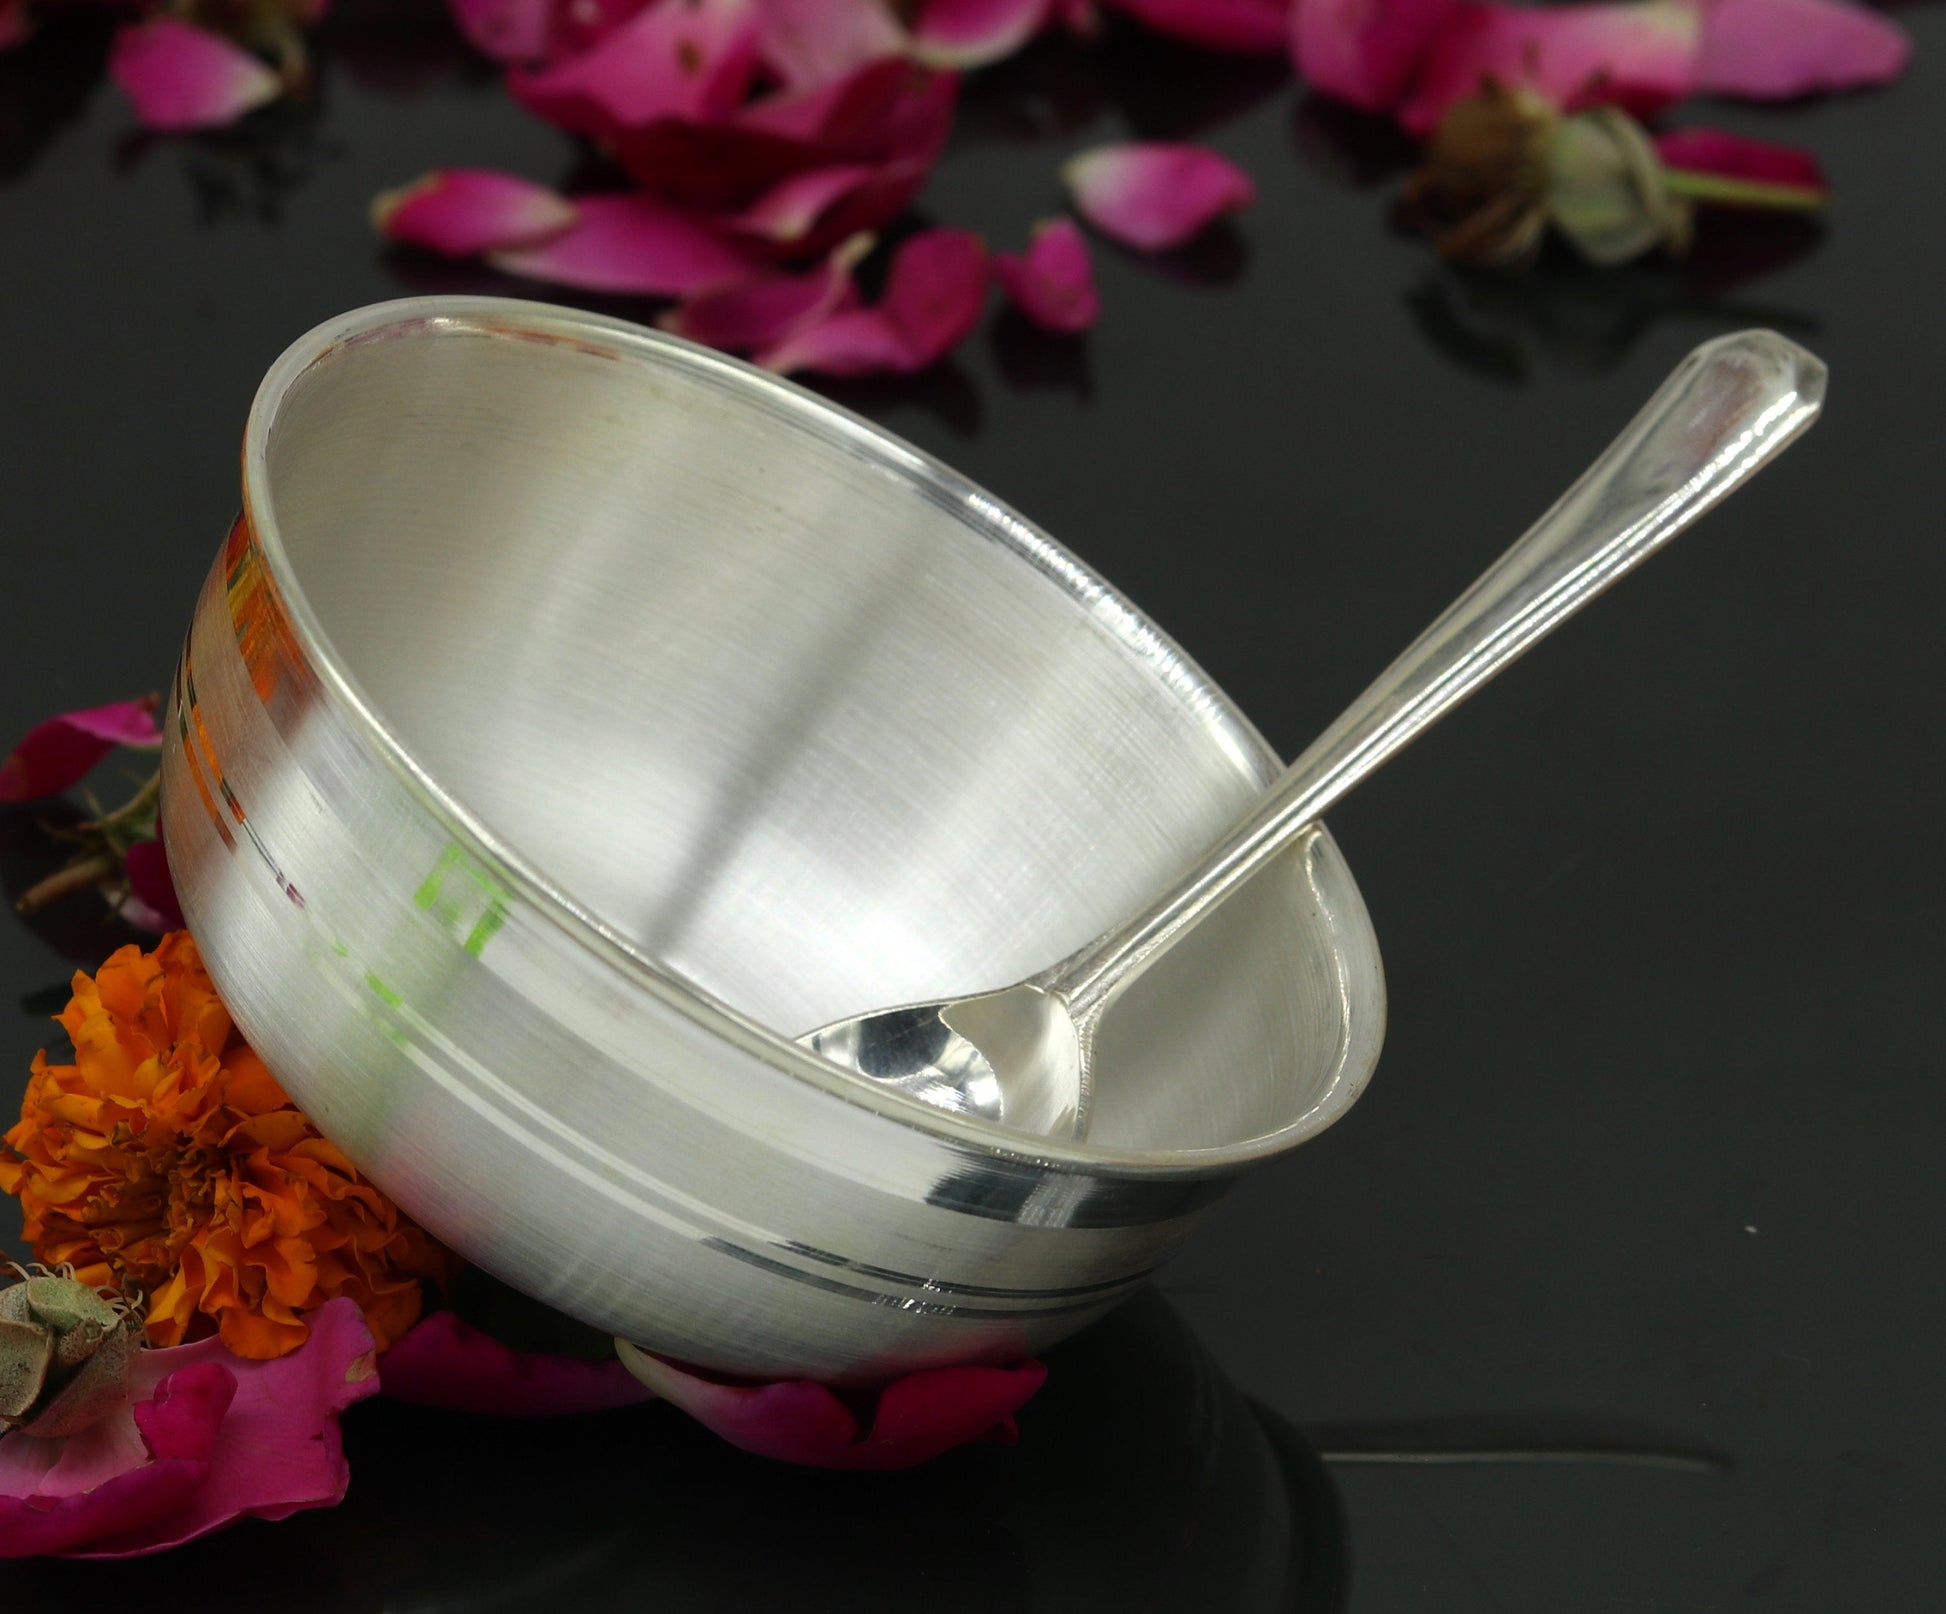 999 pure sterling silver handmade solid silver bowl kitchen utensils, vessels, silver has antibacterial properties, keep stay healthy sv54 - TRIBAL ORNAMENTS